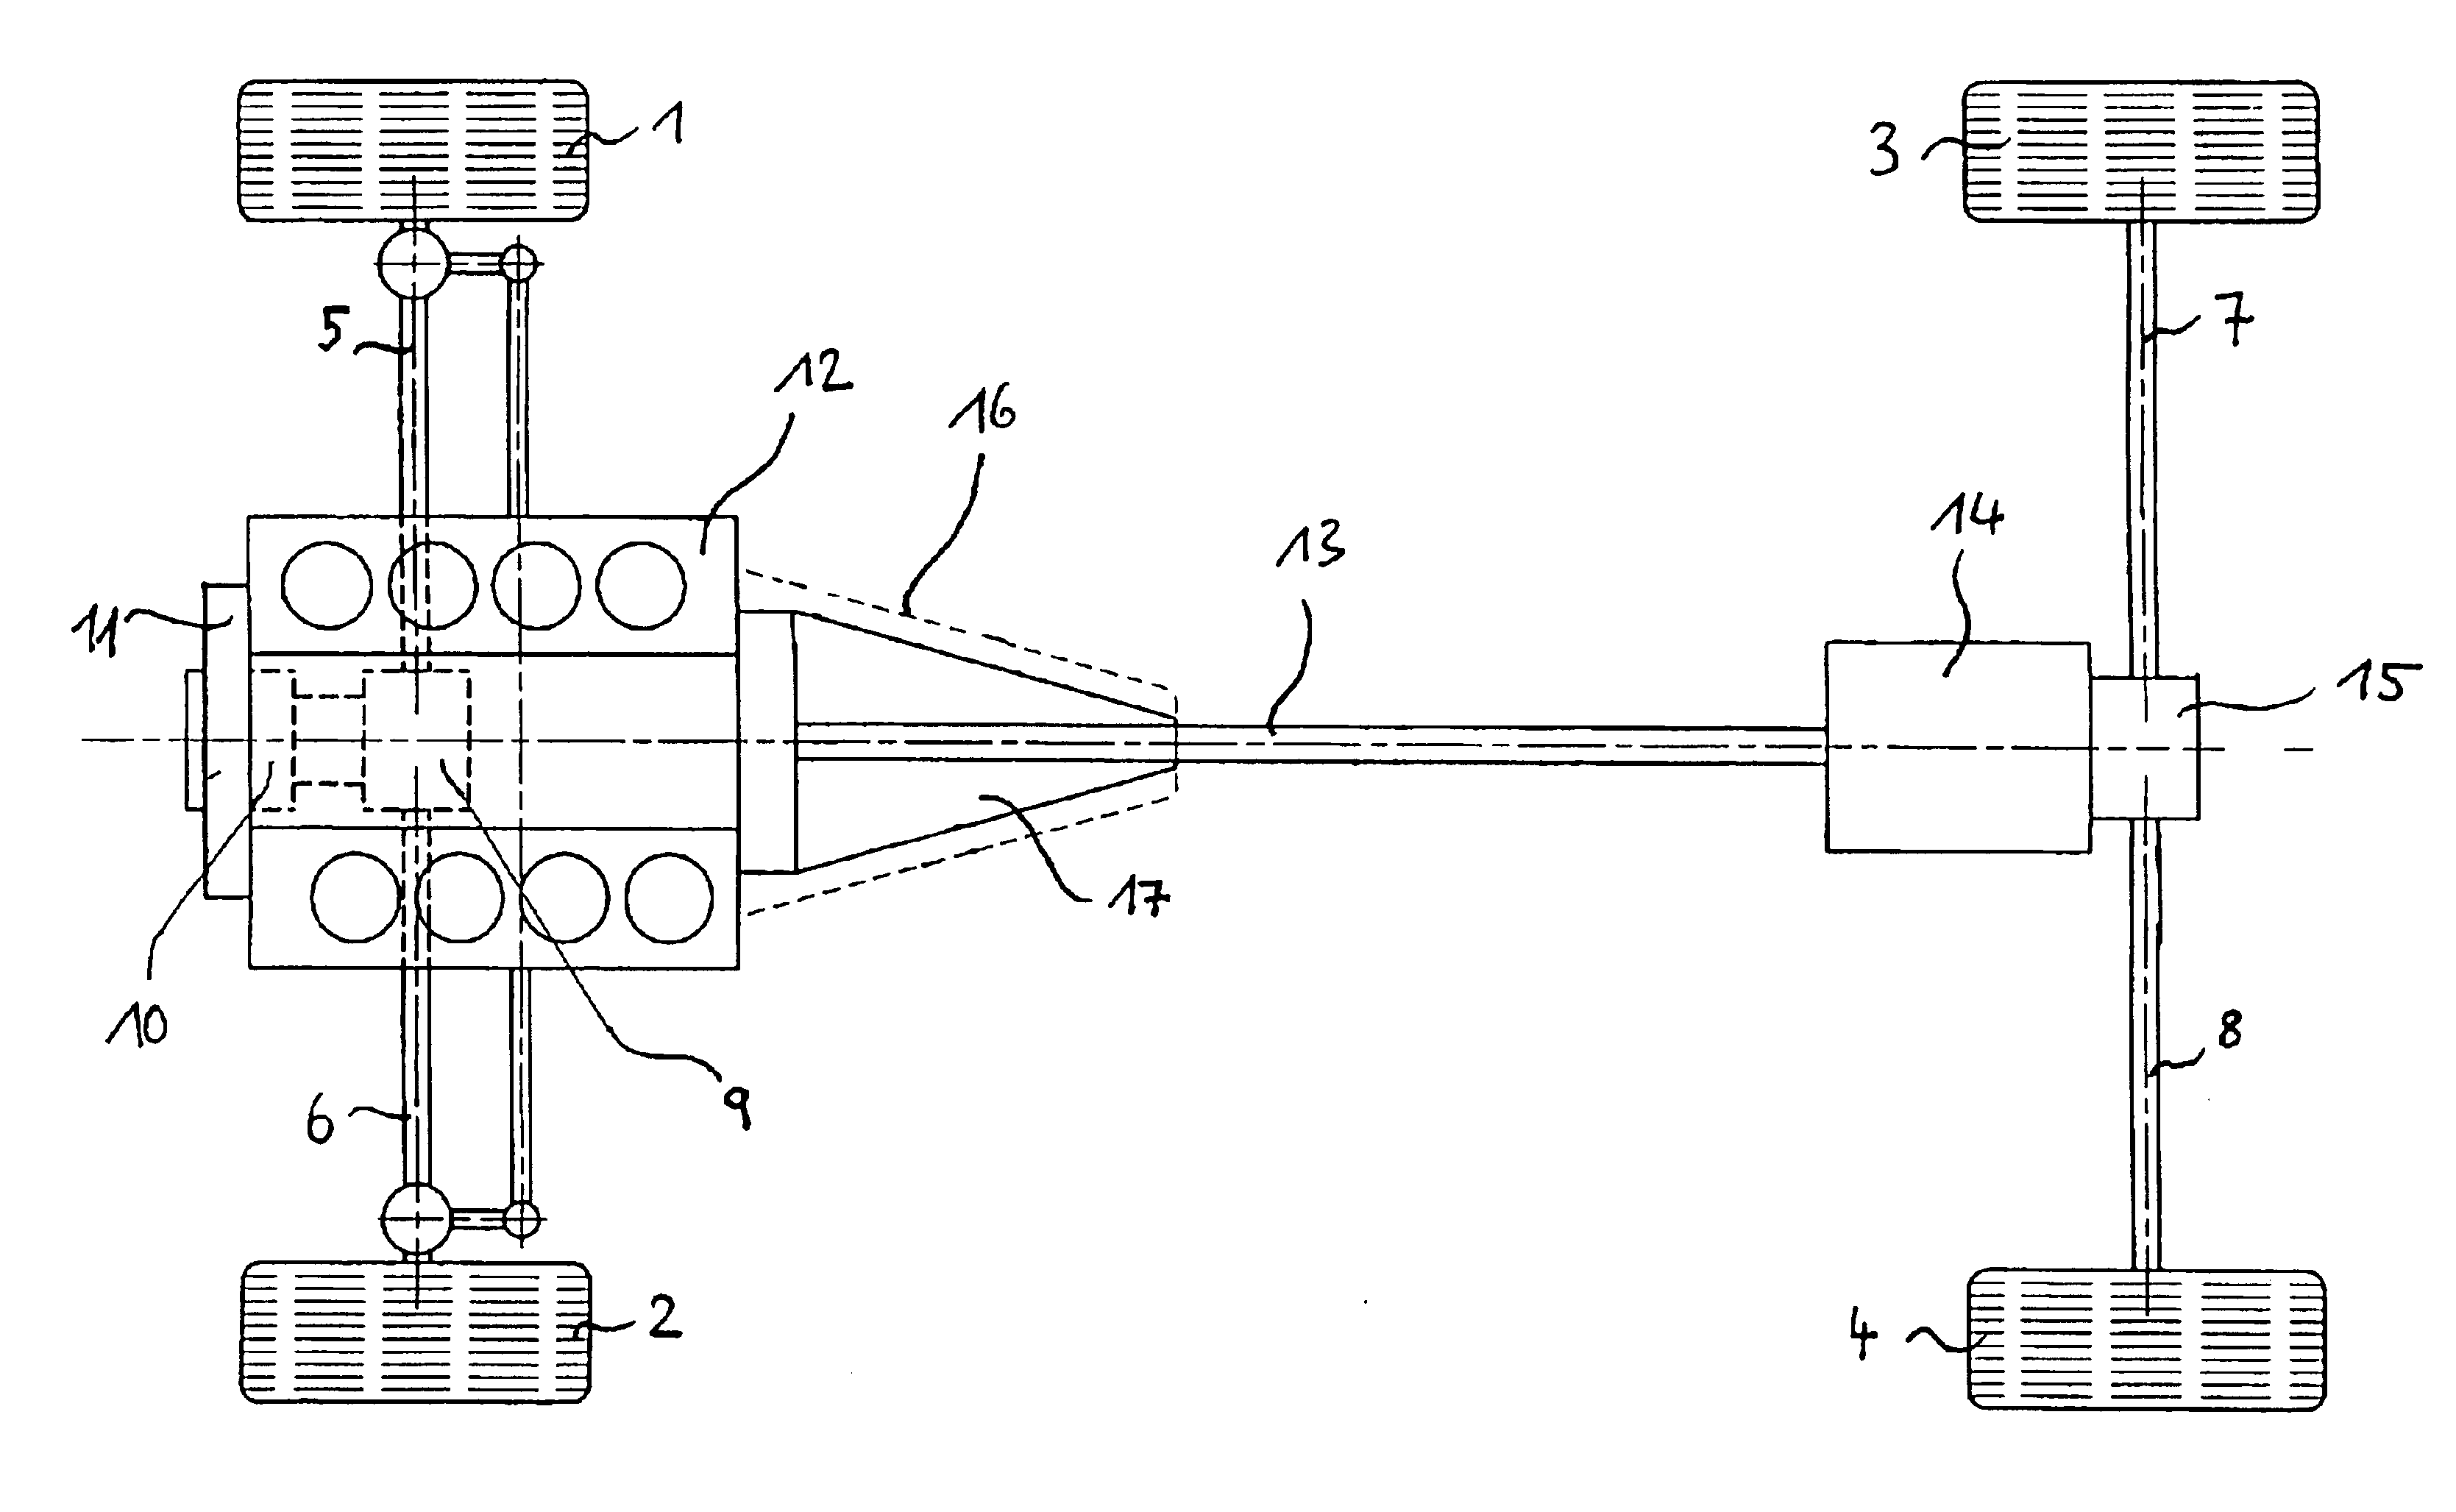 Vehicle having an internal combustion engine and a fuel cell and method of making a vehicle